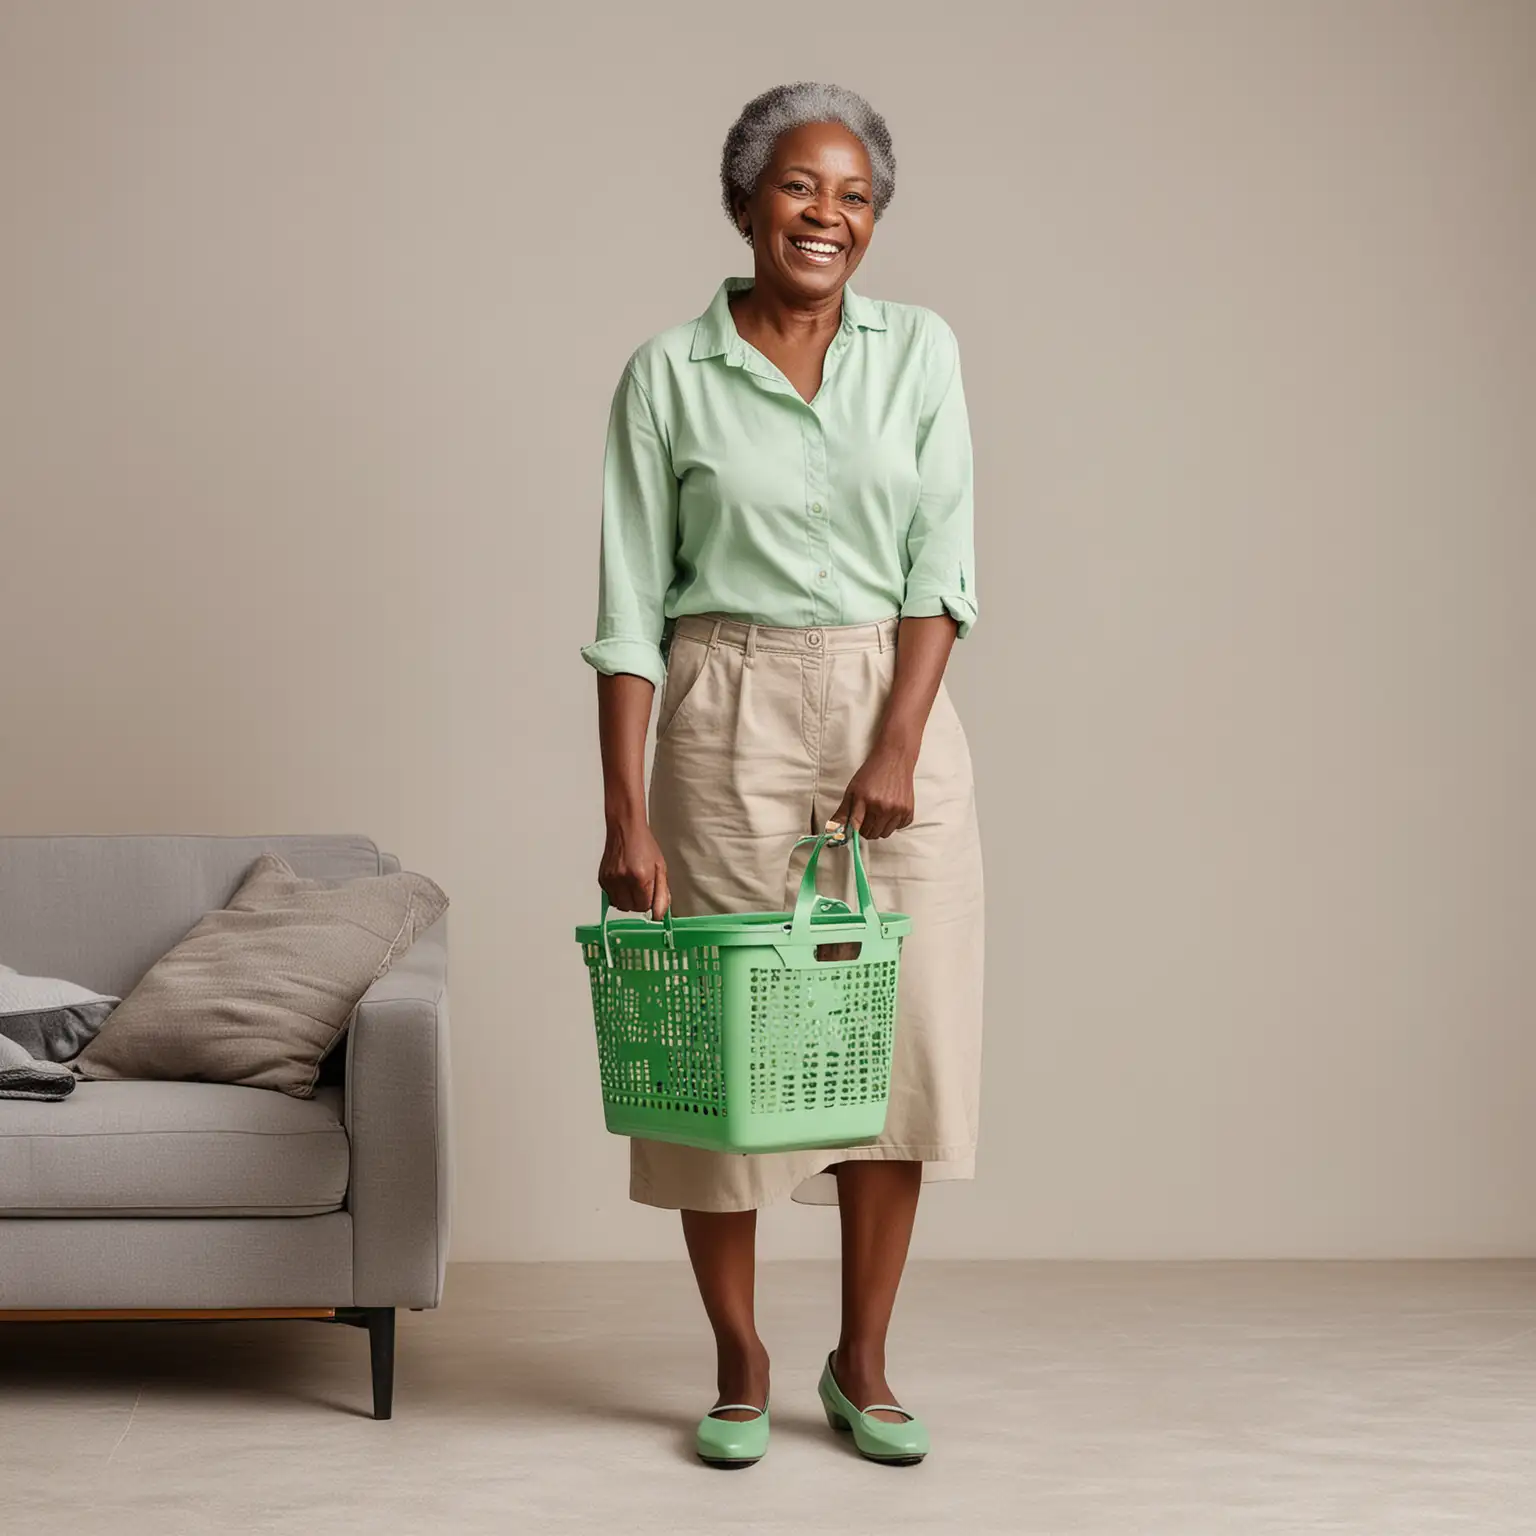 Smiling elderly African woman standing  holding small green plastic laundry basket with both hands. Standing in neat flat shoes side profile